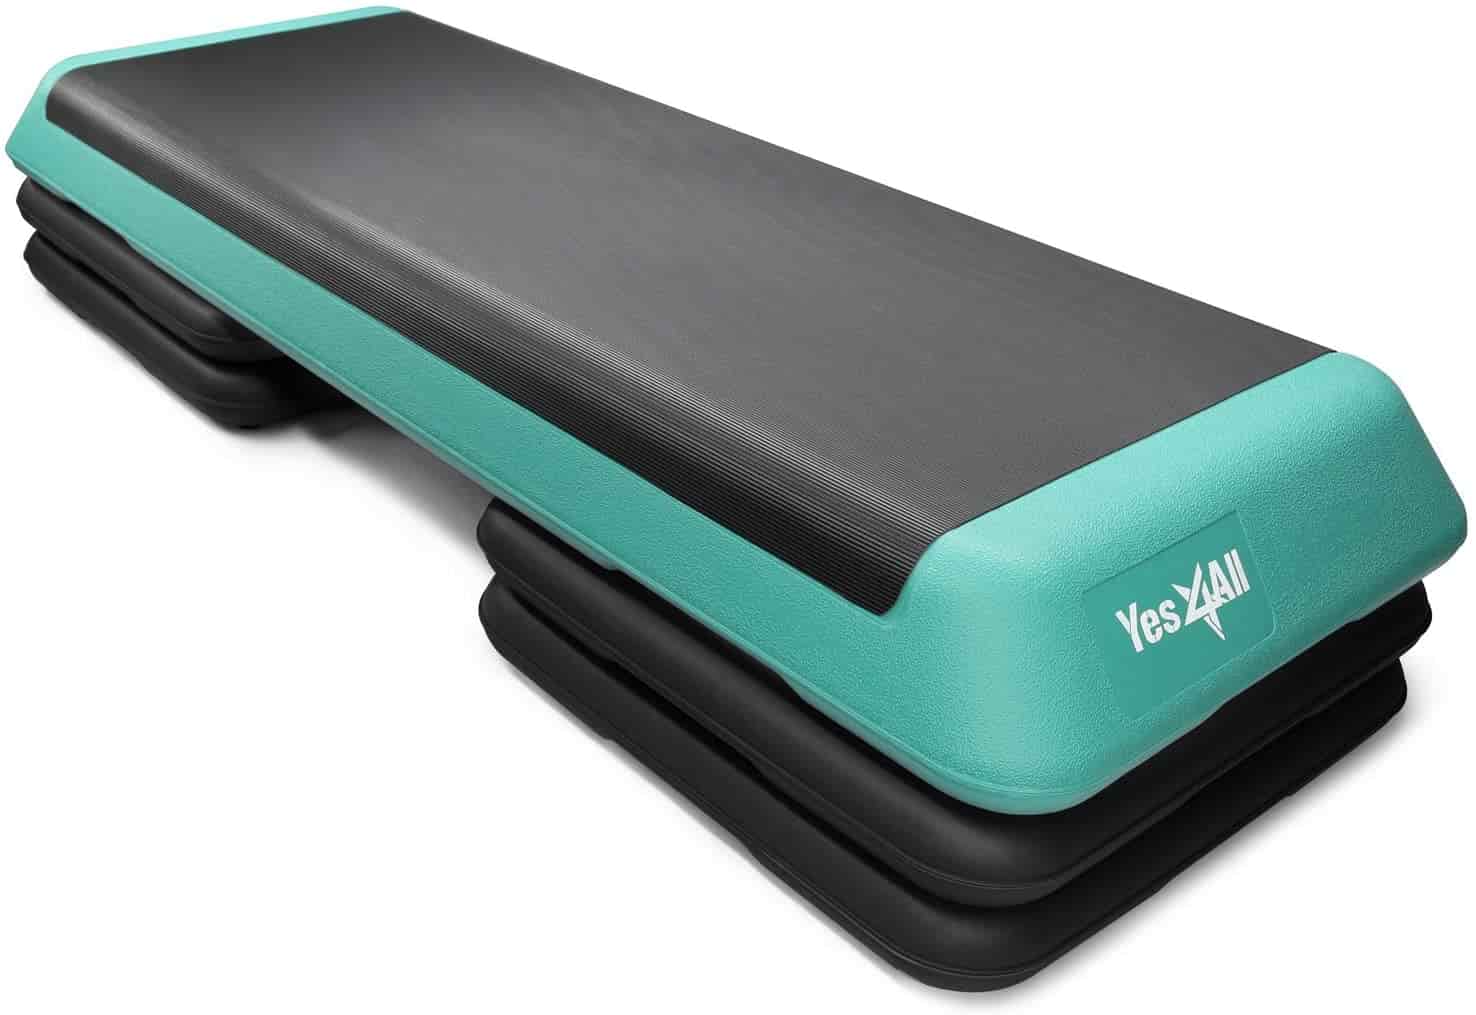 Yes4All Aerobic Exercise Workout Step Platform